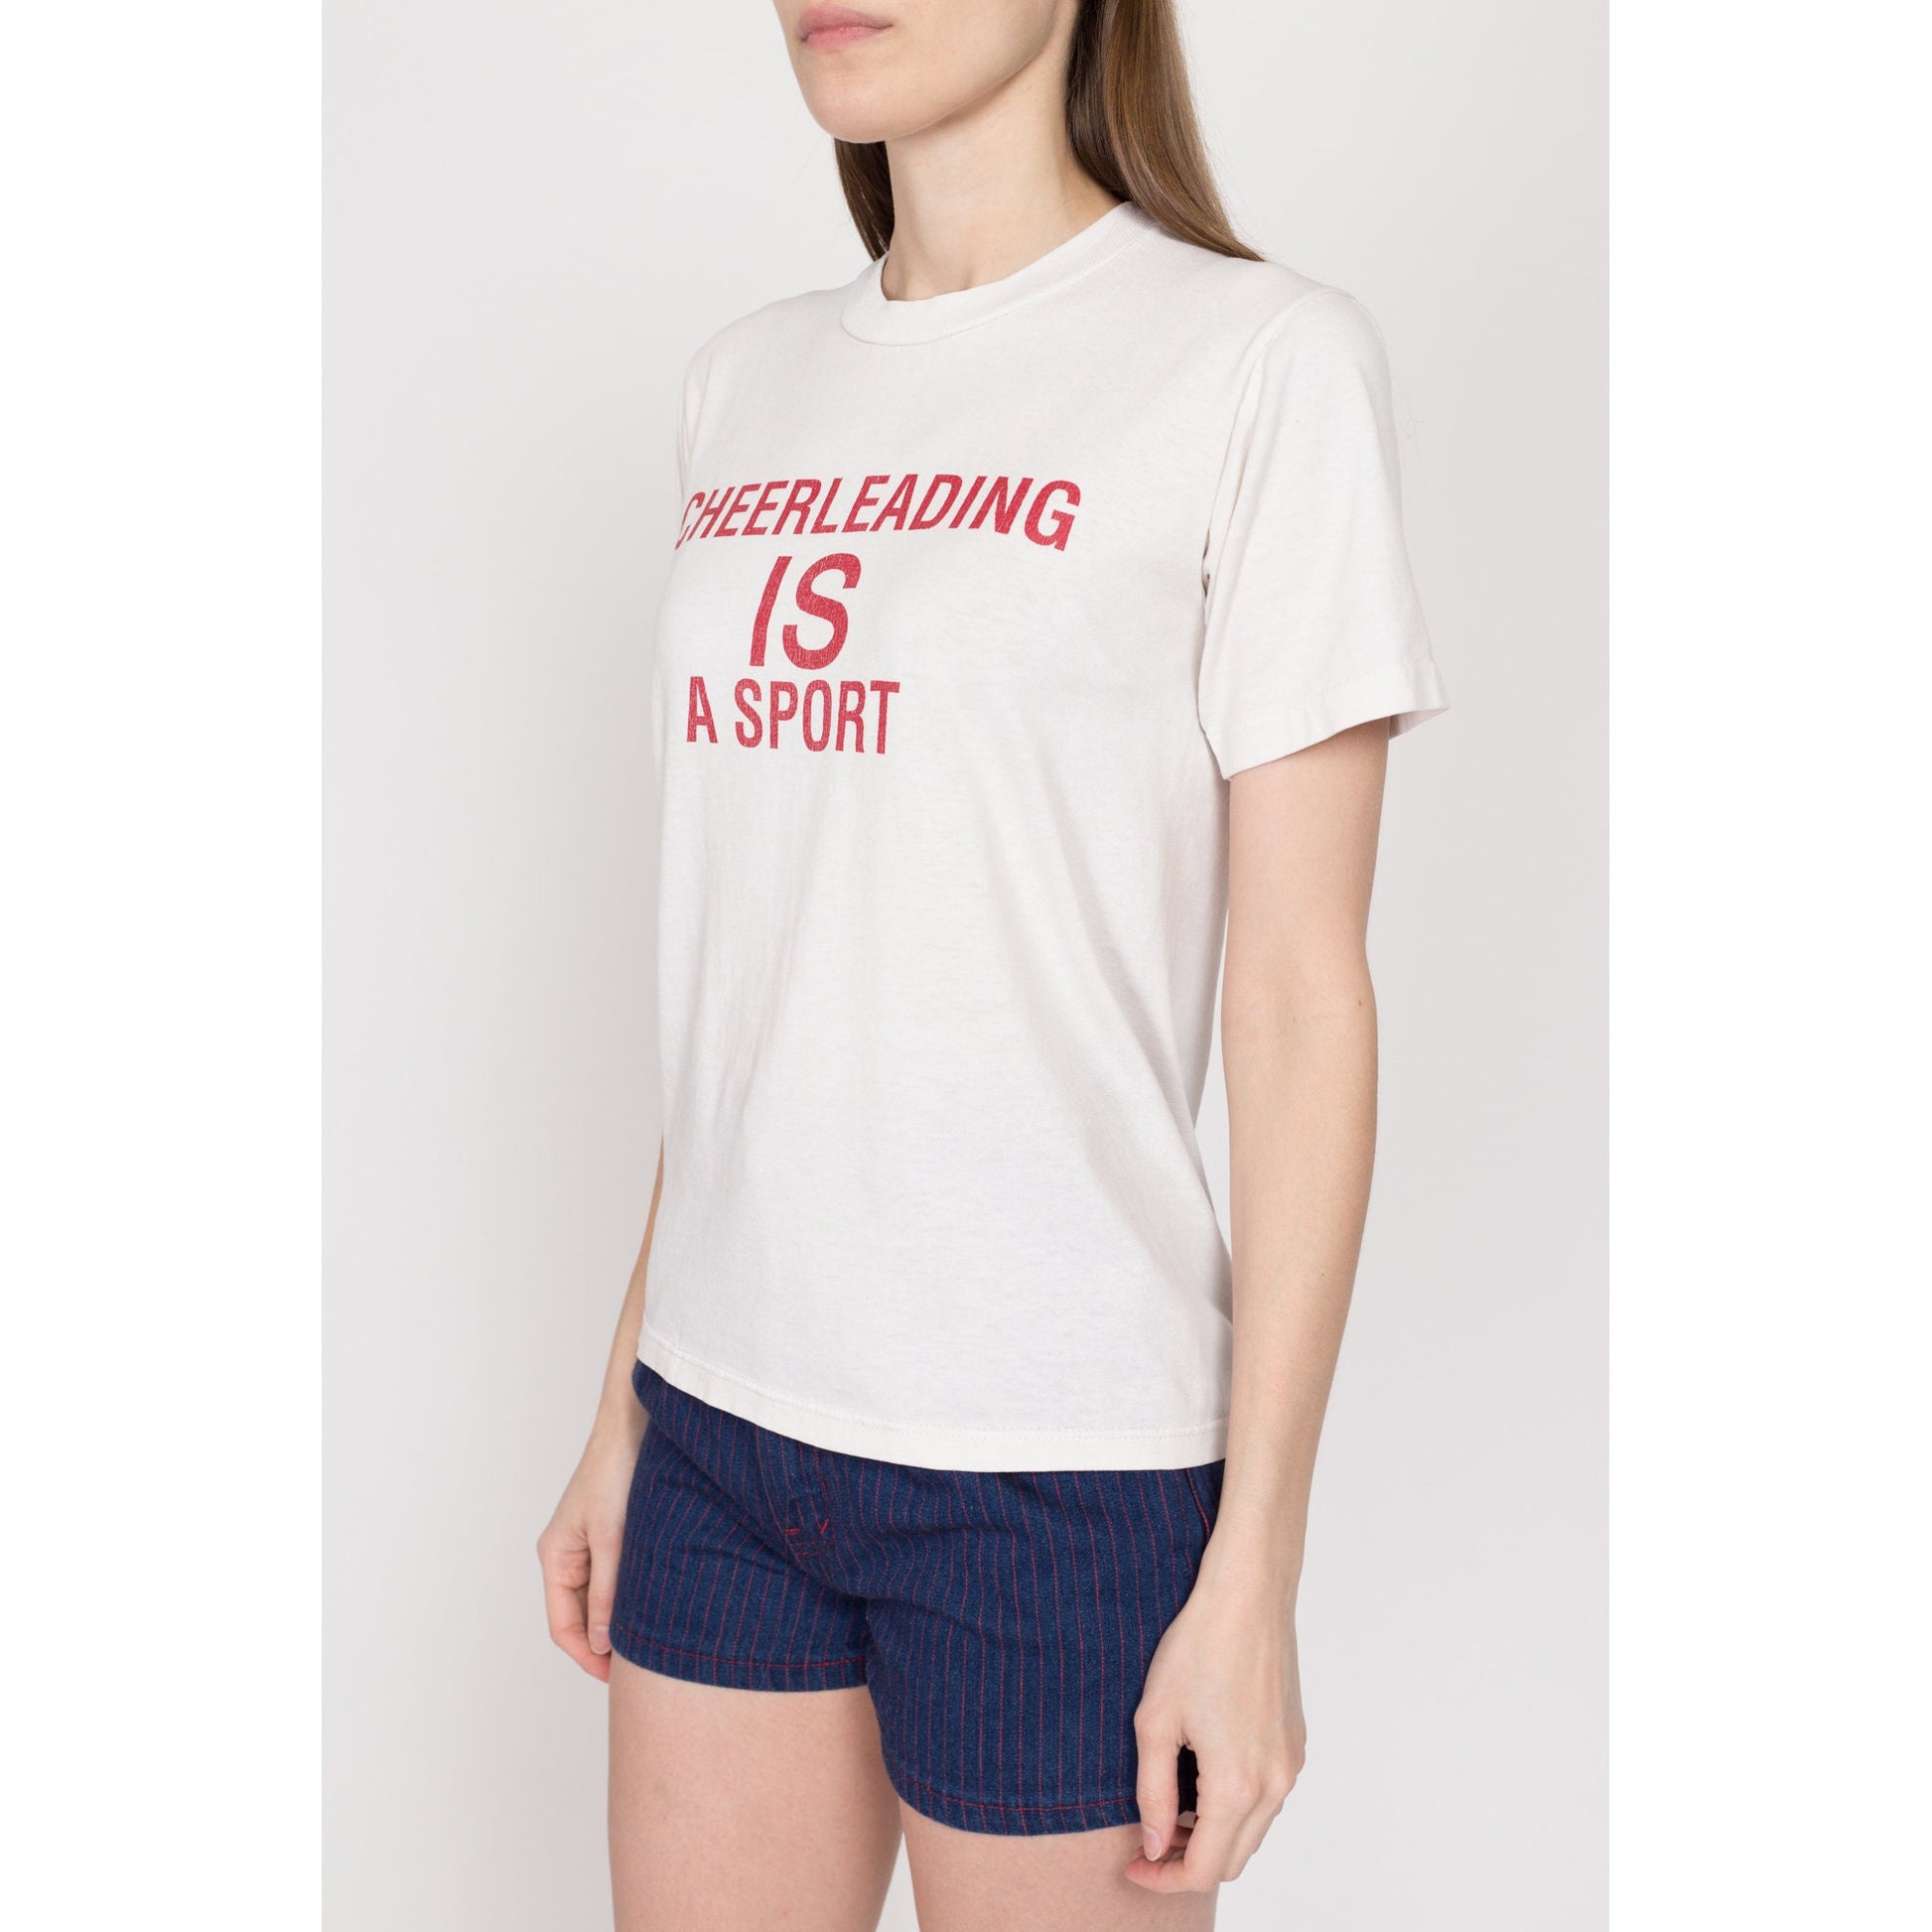 Small 90s "Cheerleading IS A Sport" T Shirt | Vintage White Cheerleader Graphic Tee